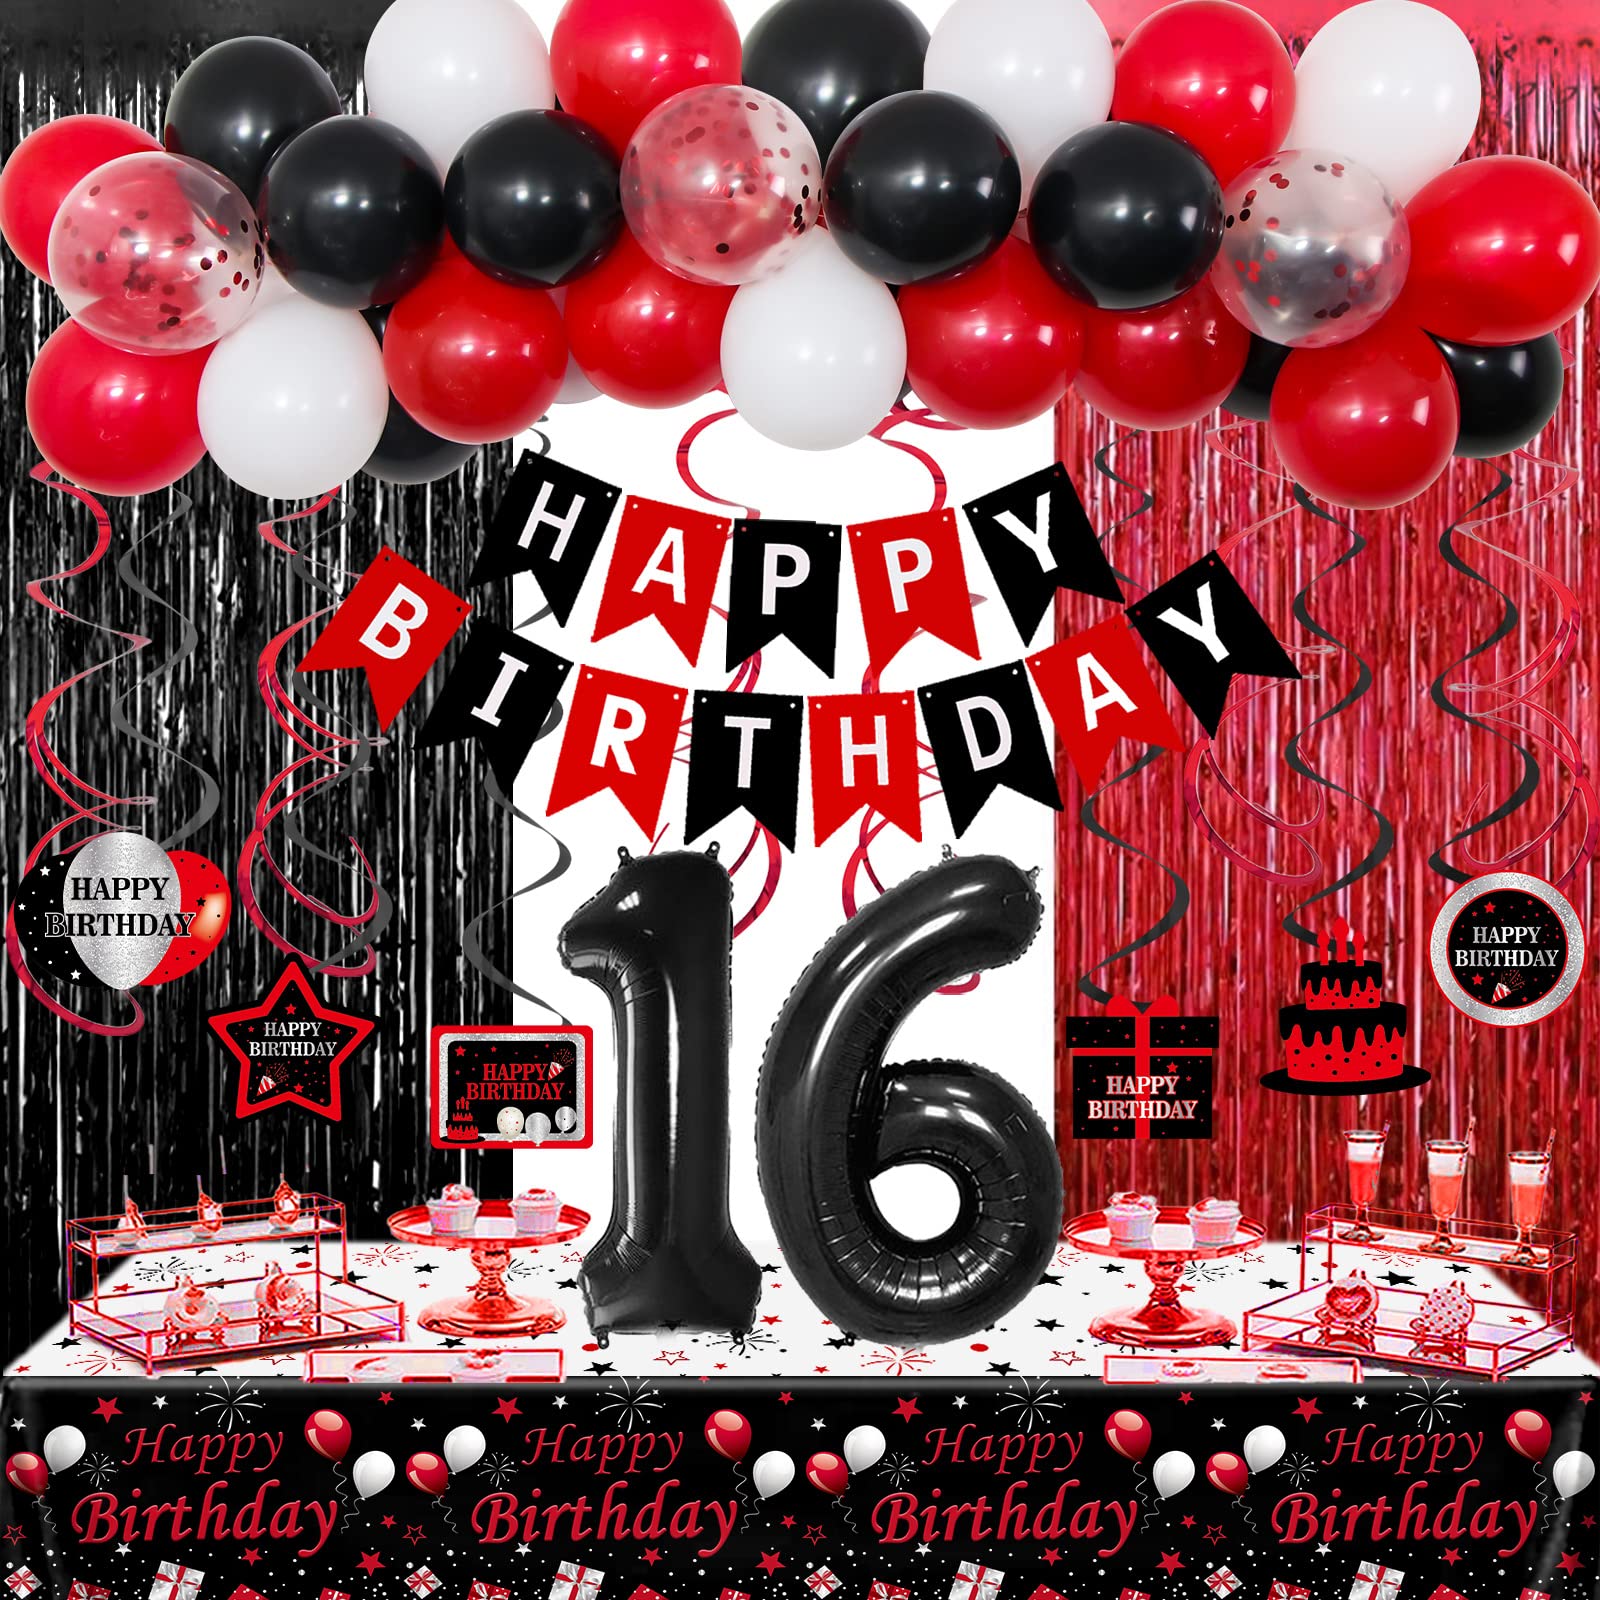 16th Birthday Decorations for Boys Girls,Red and Black 16th Birthday Balloons Banner Number 16 Balloon Hanging Swirls Tablecloth Foil Fringe Curtains For Sweet 16th Birthday Decorations Party Supplies